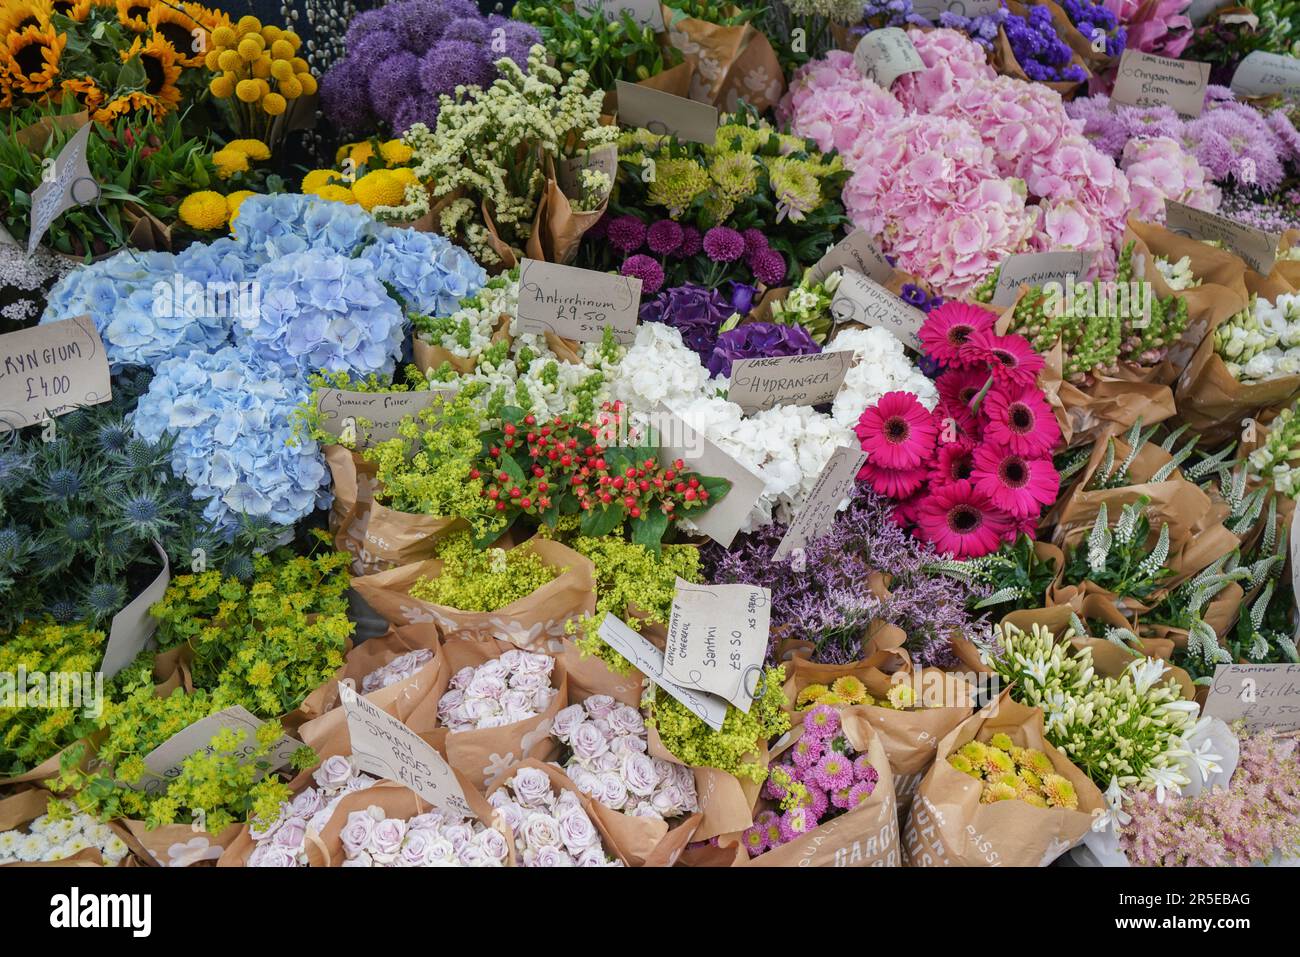 A variety of  flowers for sale at an outdoor market in Wimbledon, London, UK Stock Photo